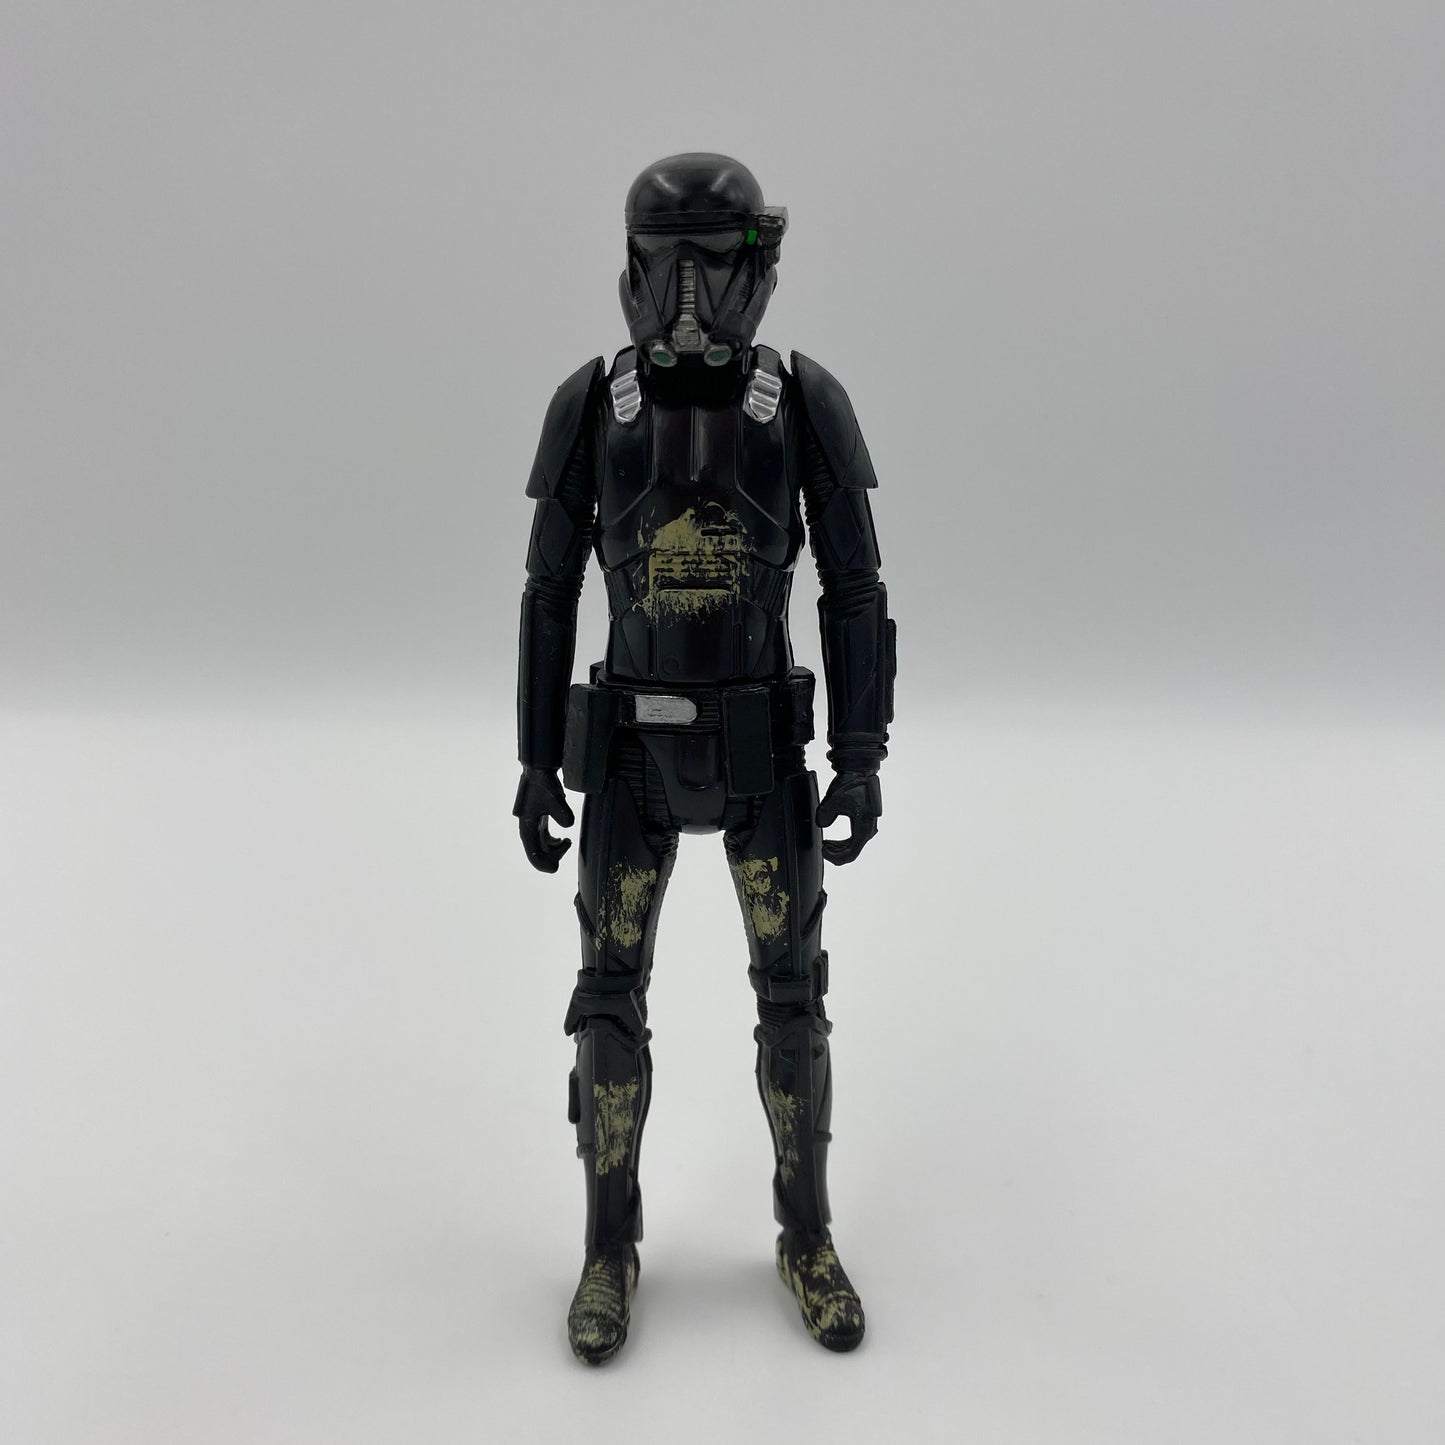 Star Wars Rogue One “Dirty” Death Trooper 3.75” loose action figure (2016) Hasbro